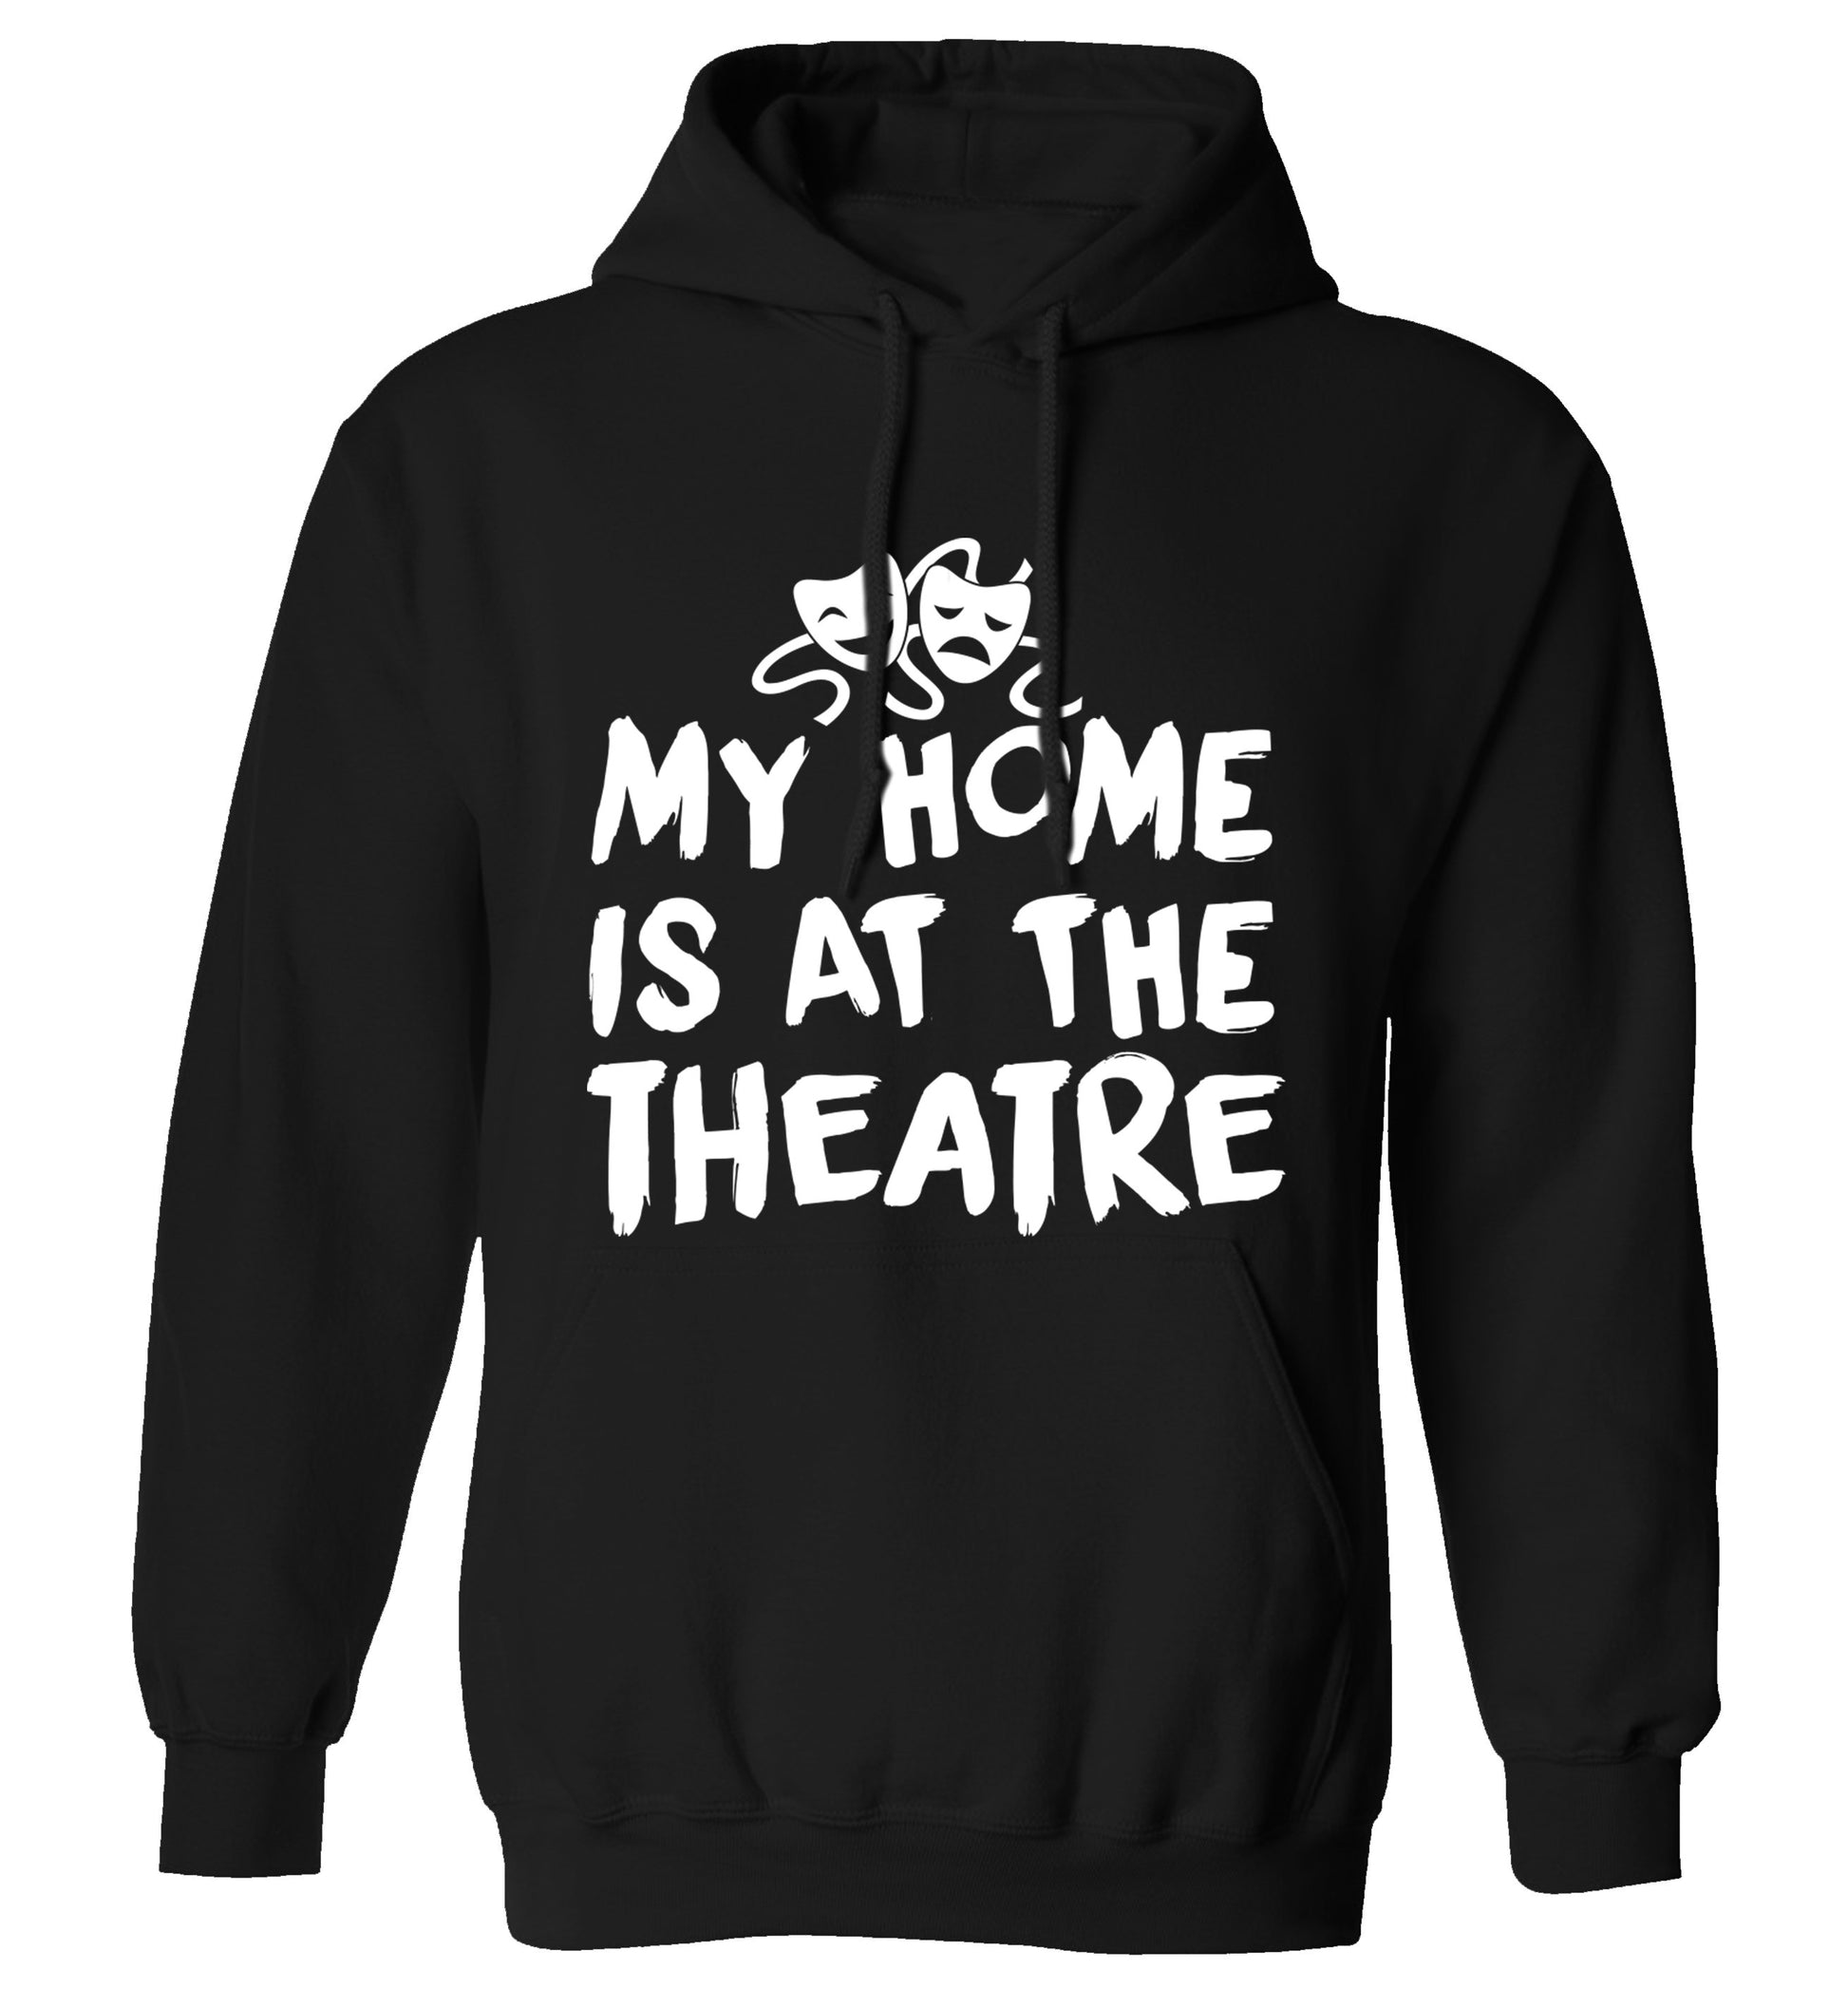 My home is at the theatre adults unisex black hoodie 2XL